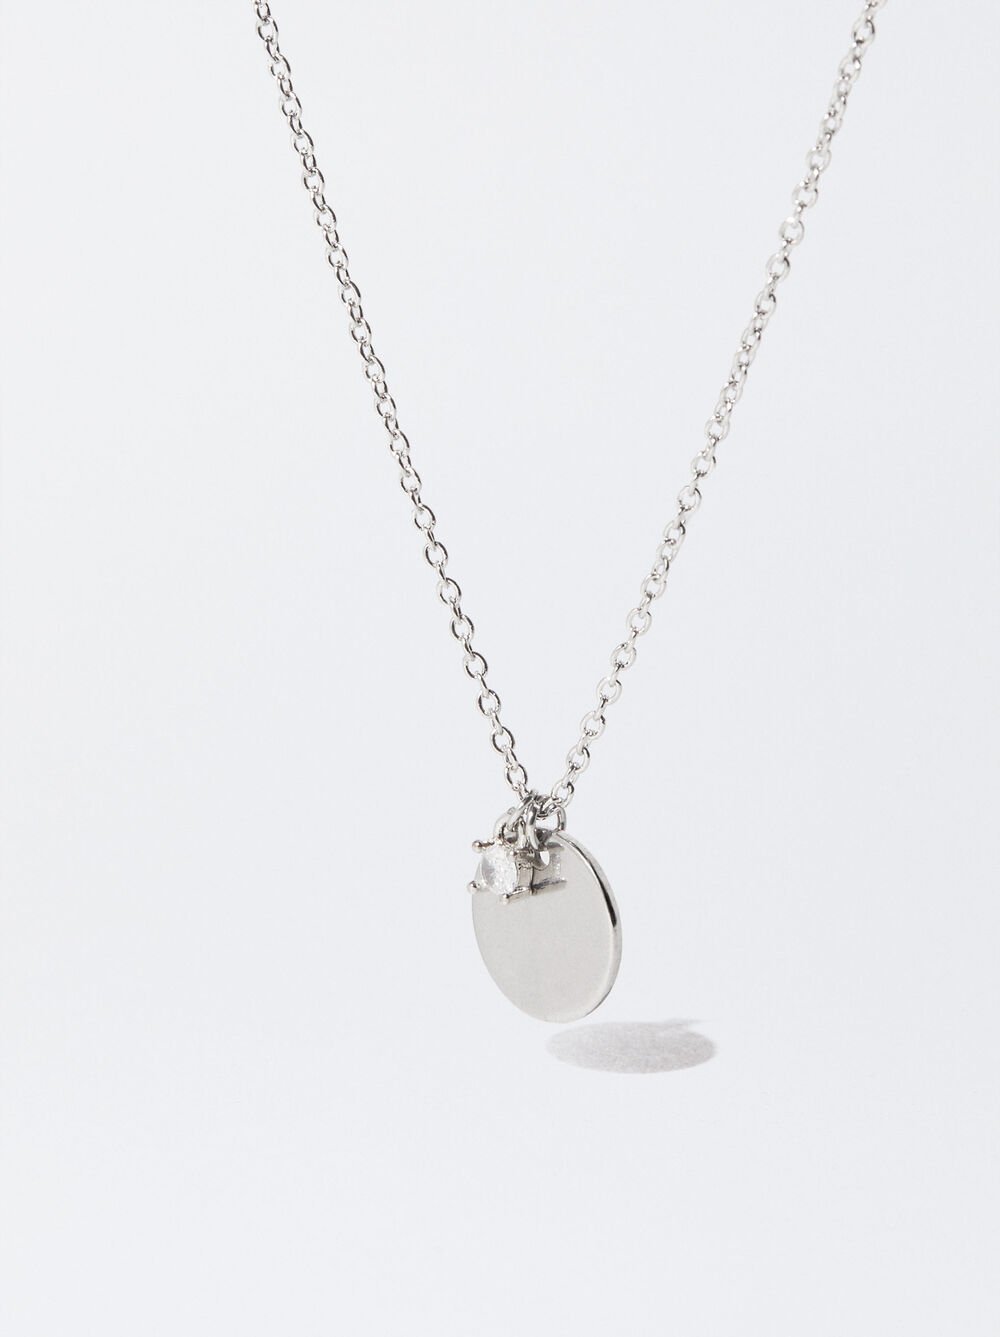 Silver-Plated Necklace With Pendant